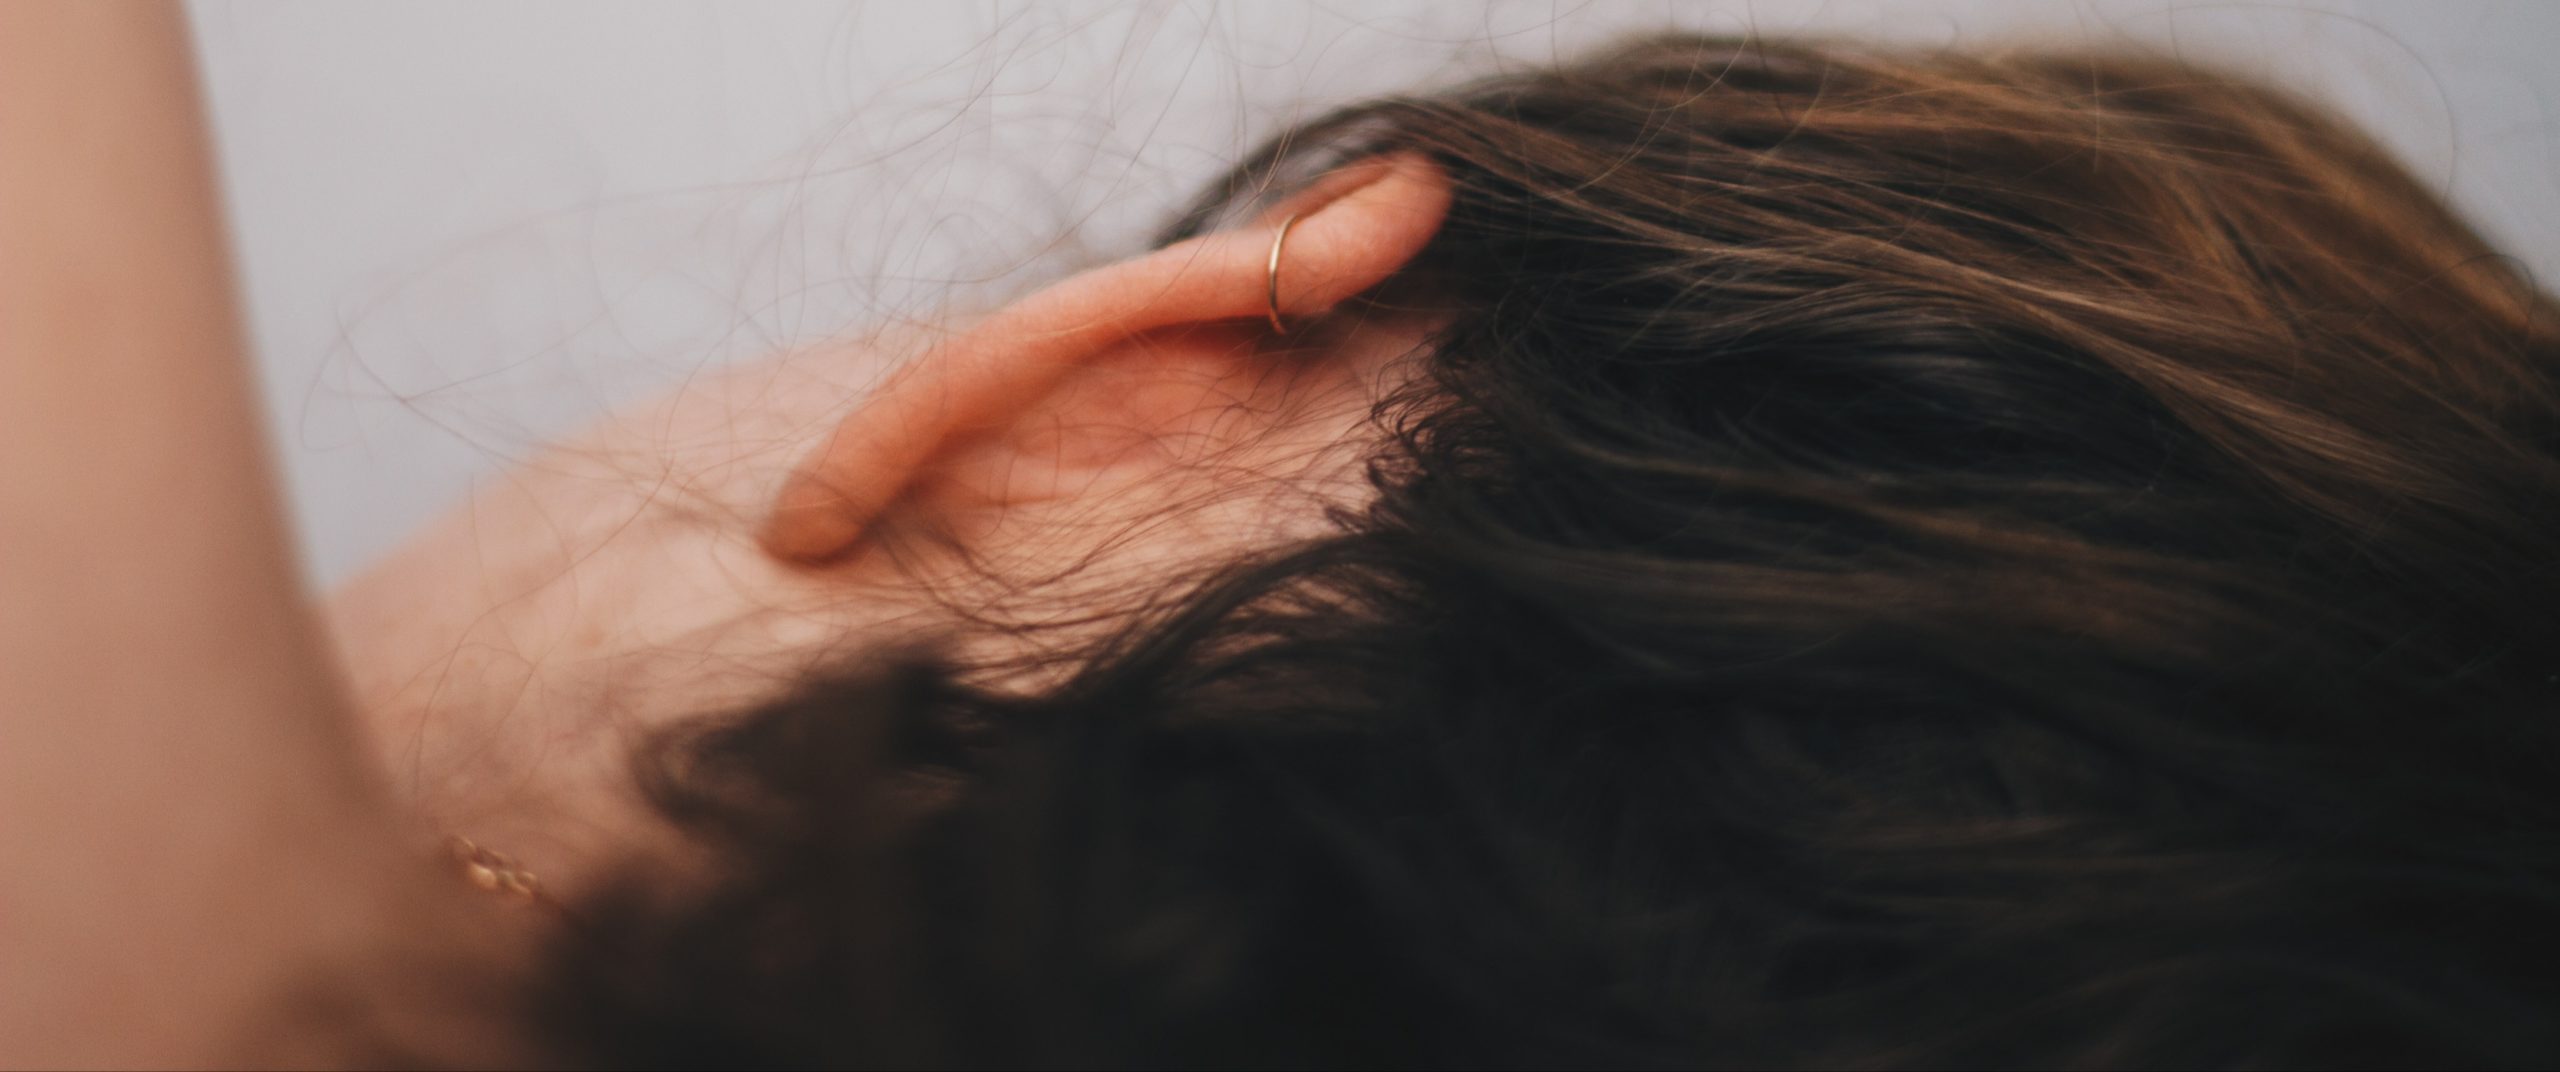 Spiritual Meaning of Ringing in Your Left Ear